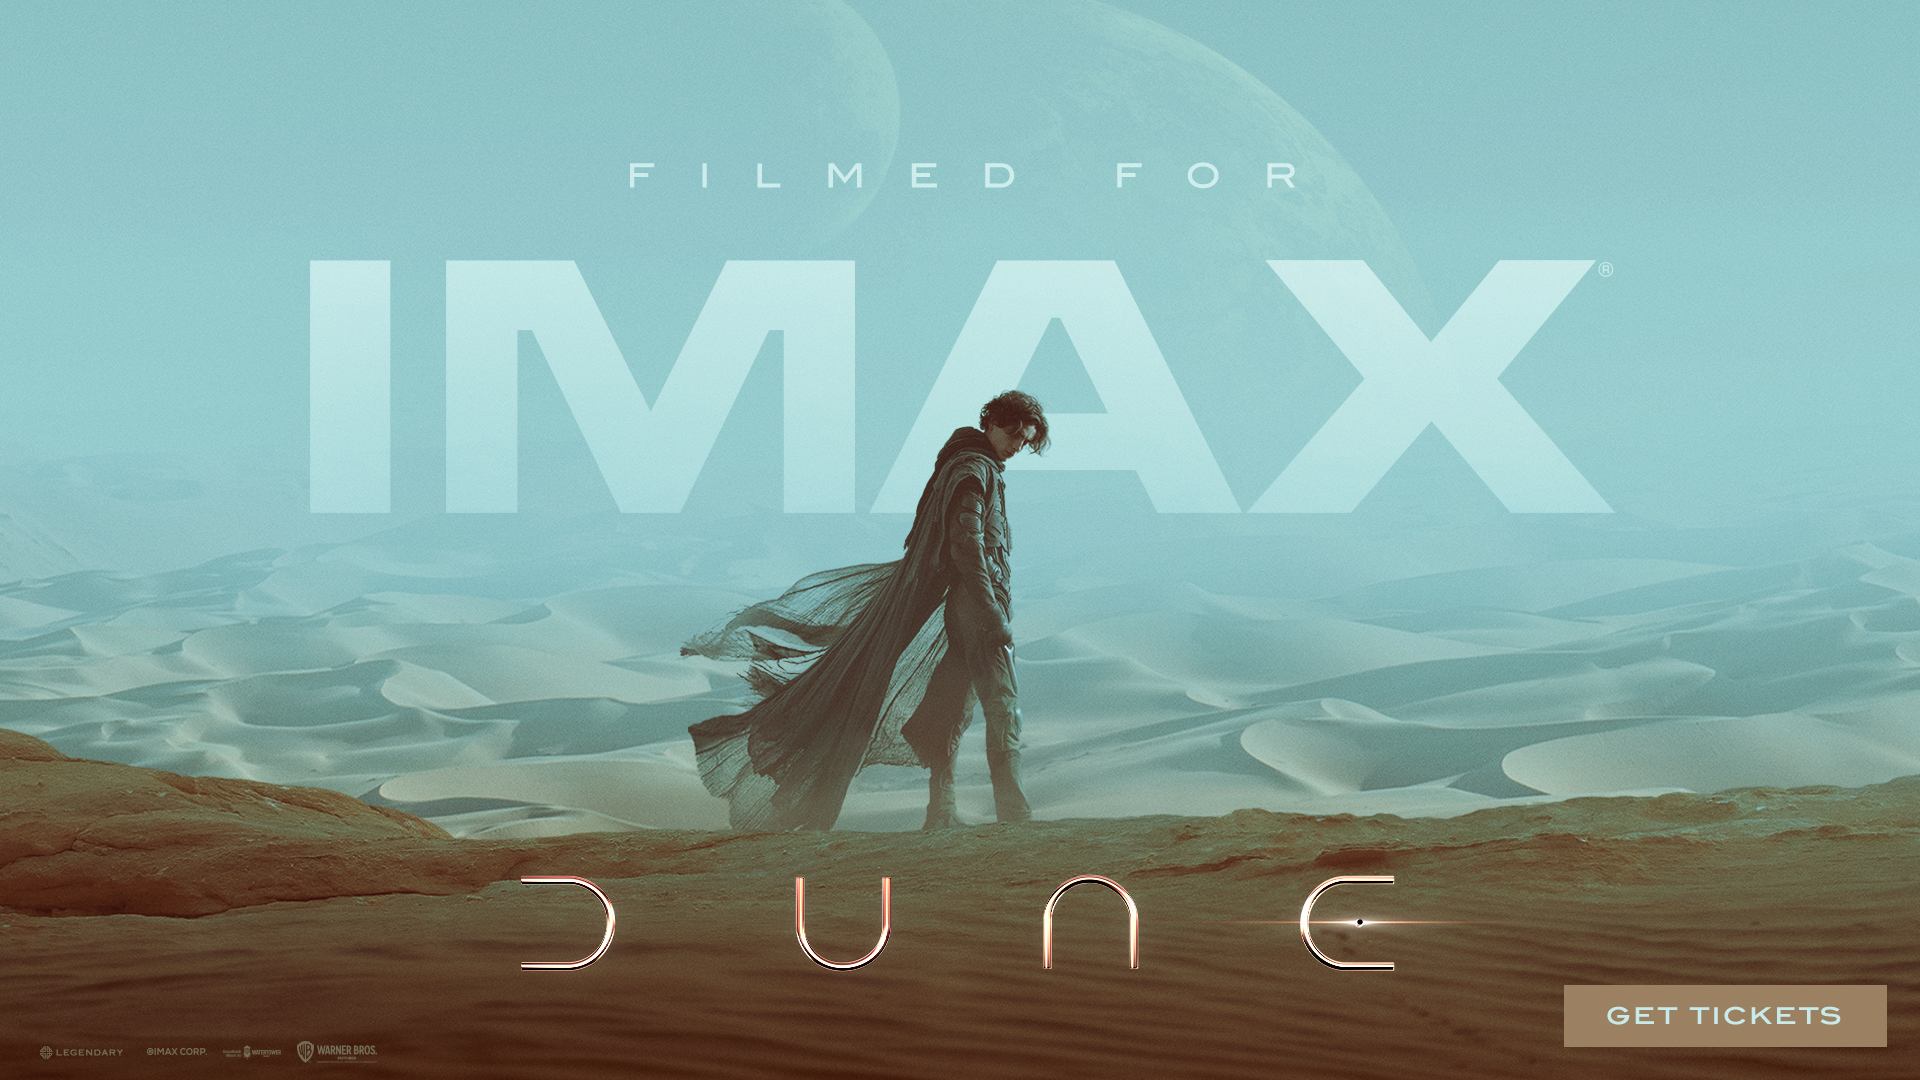 Dune comes back in IMAX